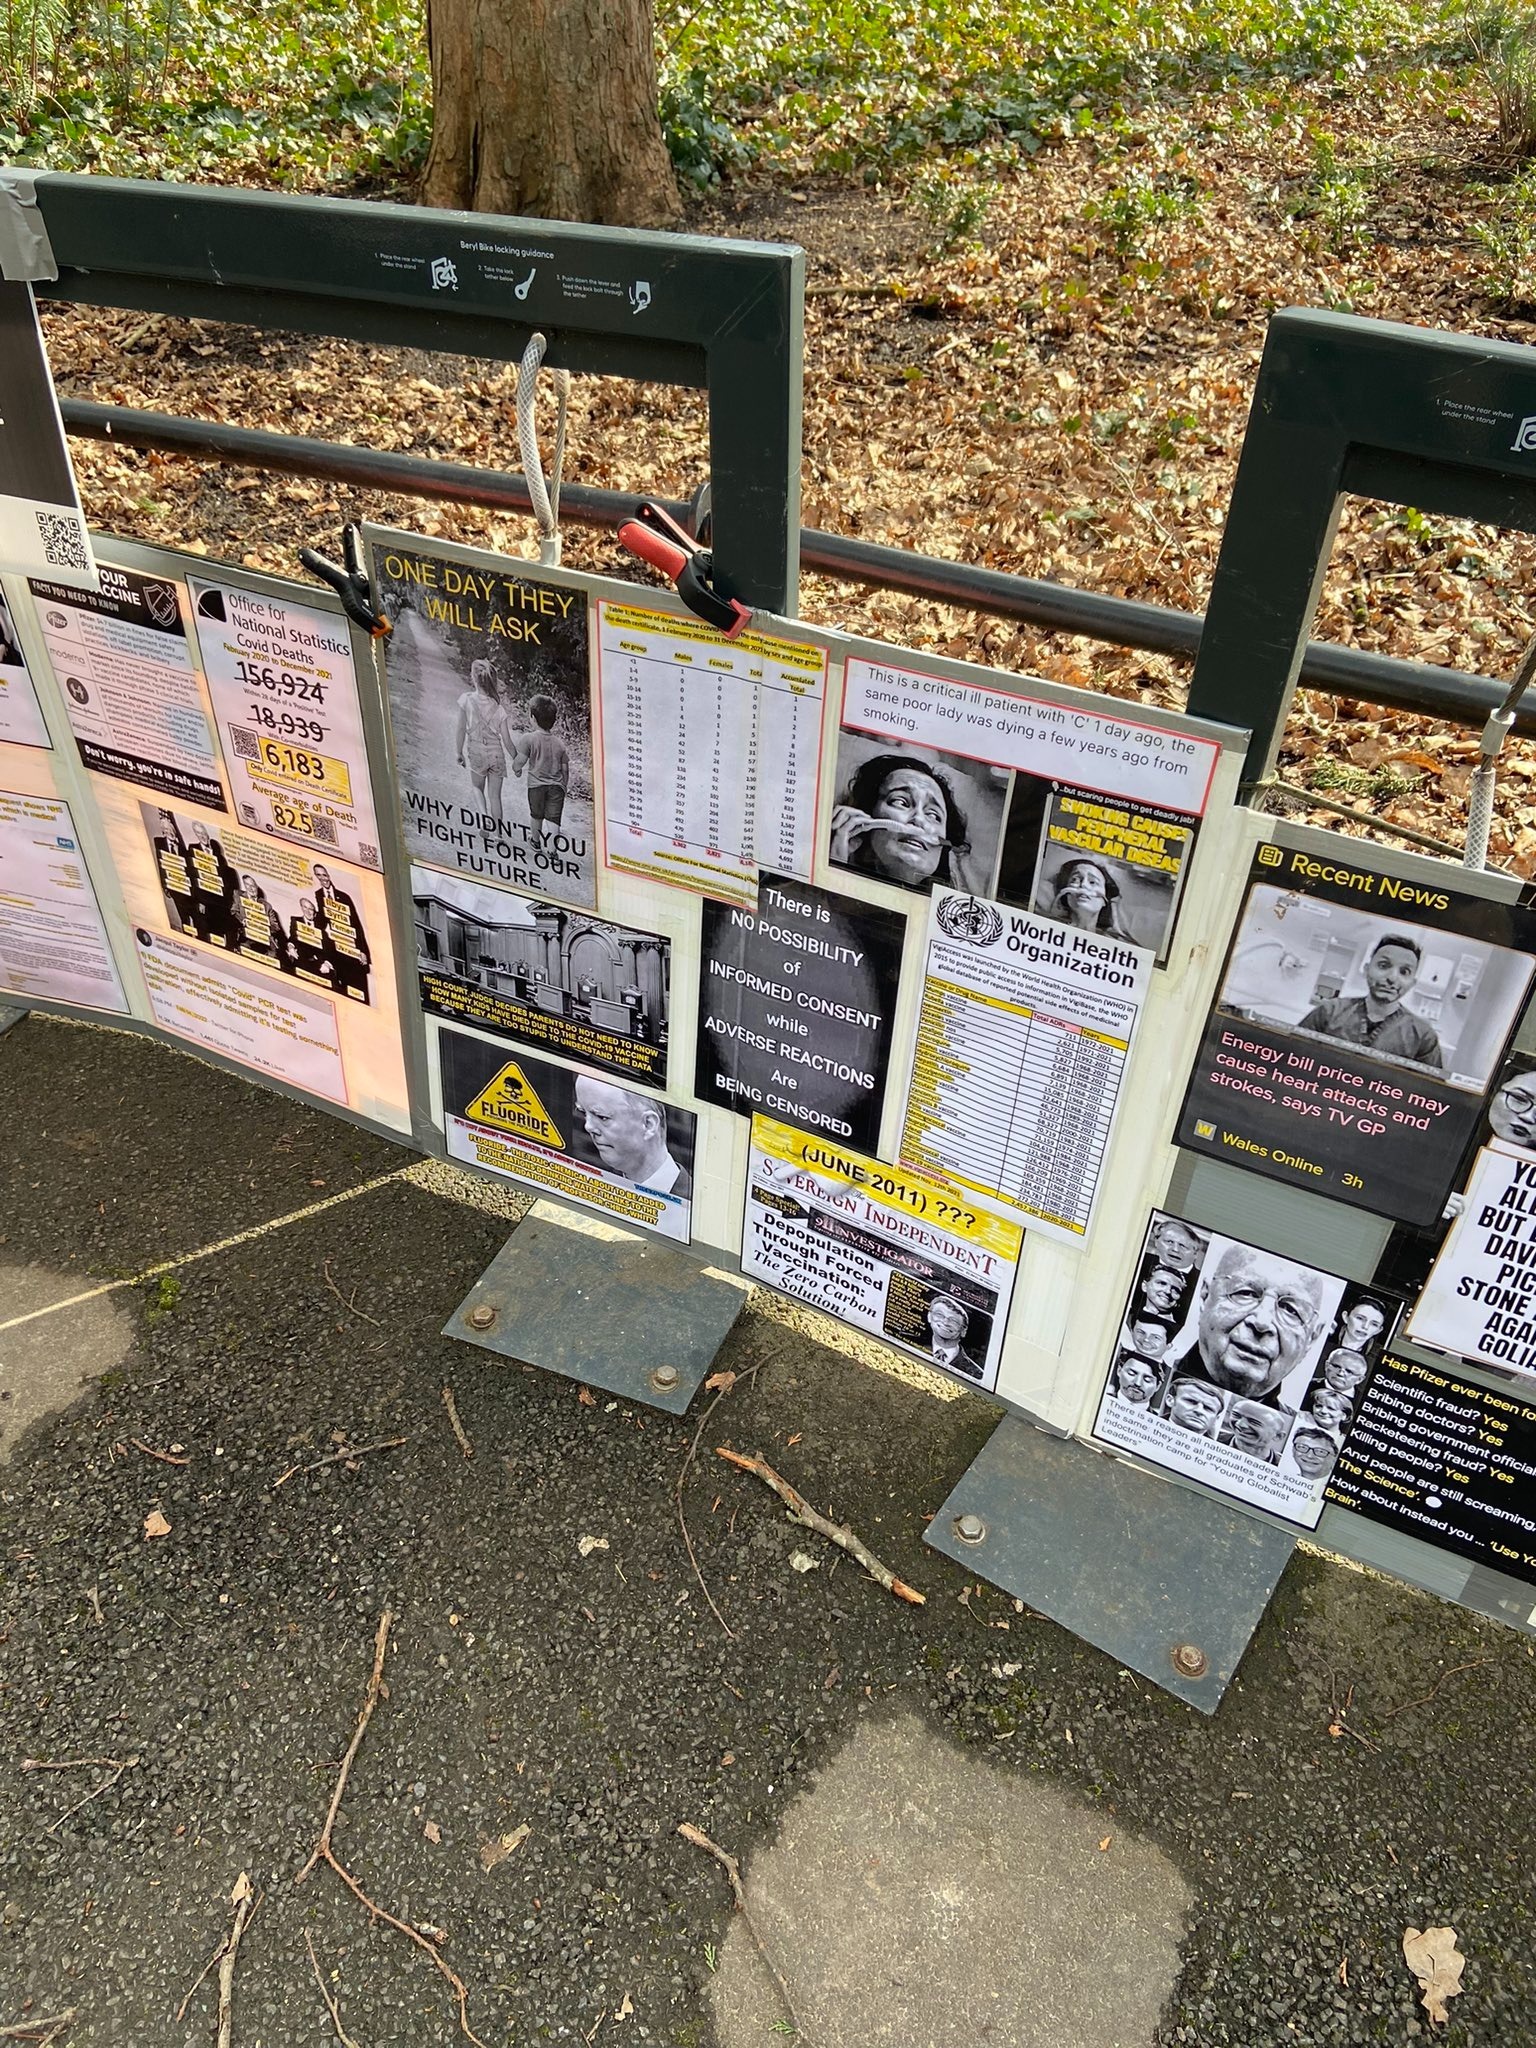 Some of the posters on display. Credit: Lester Holloway